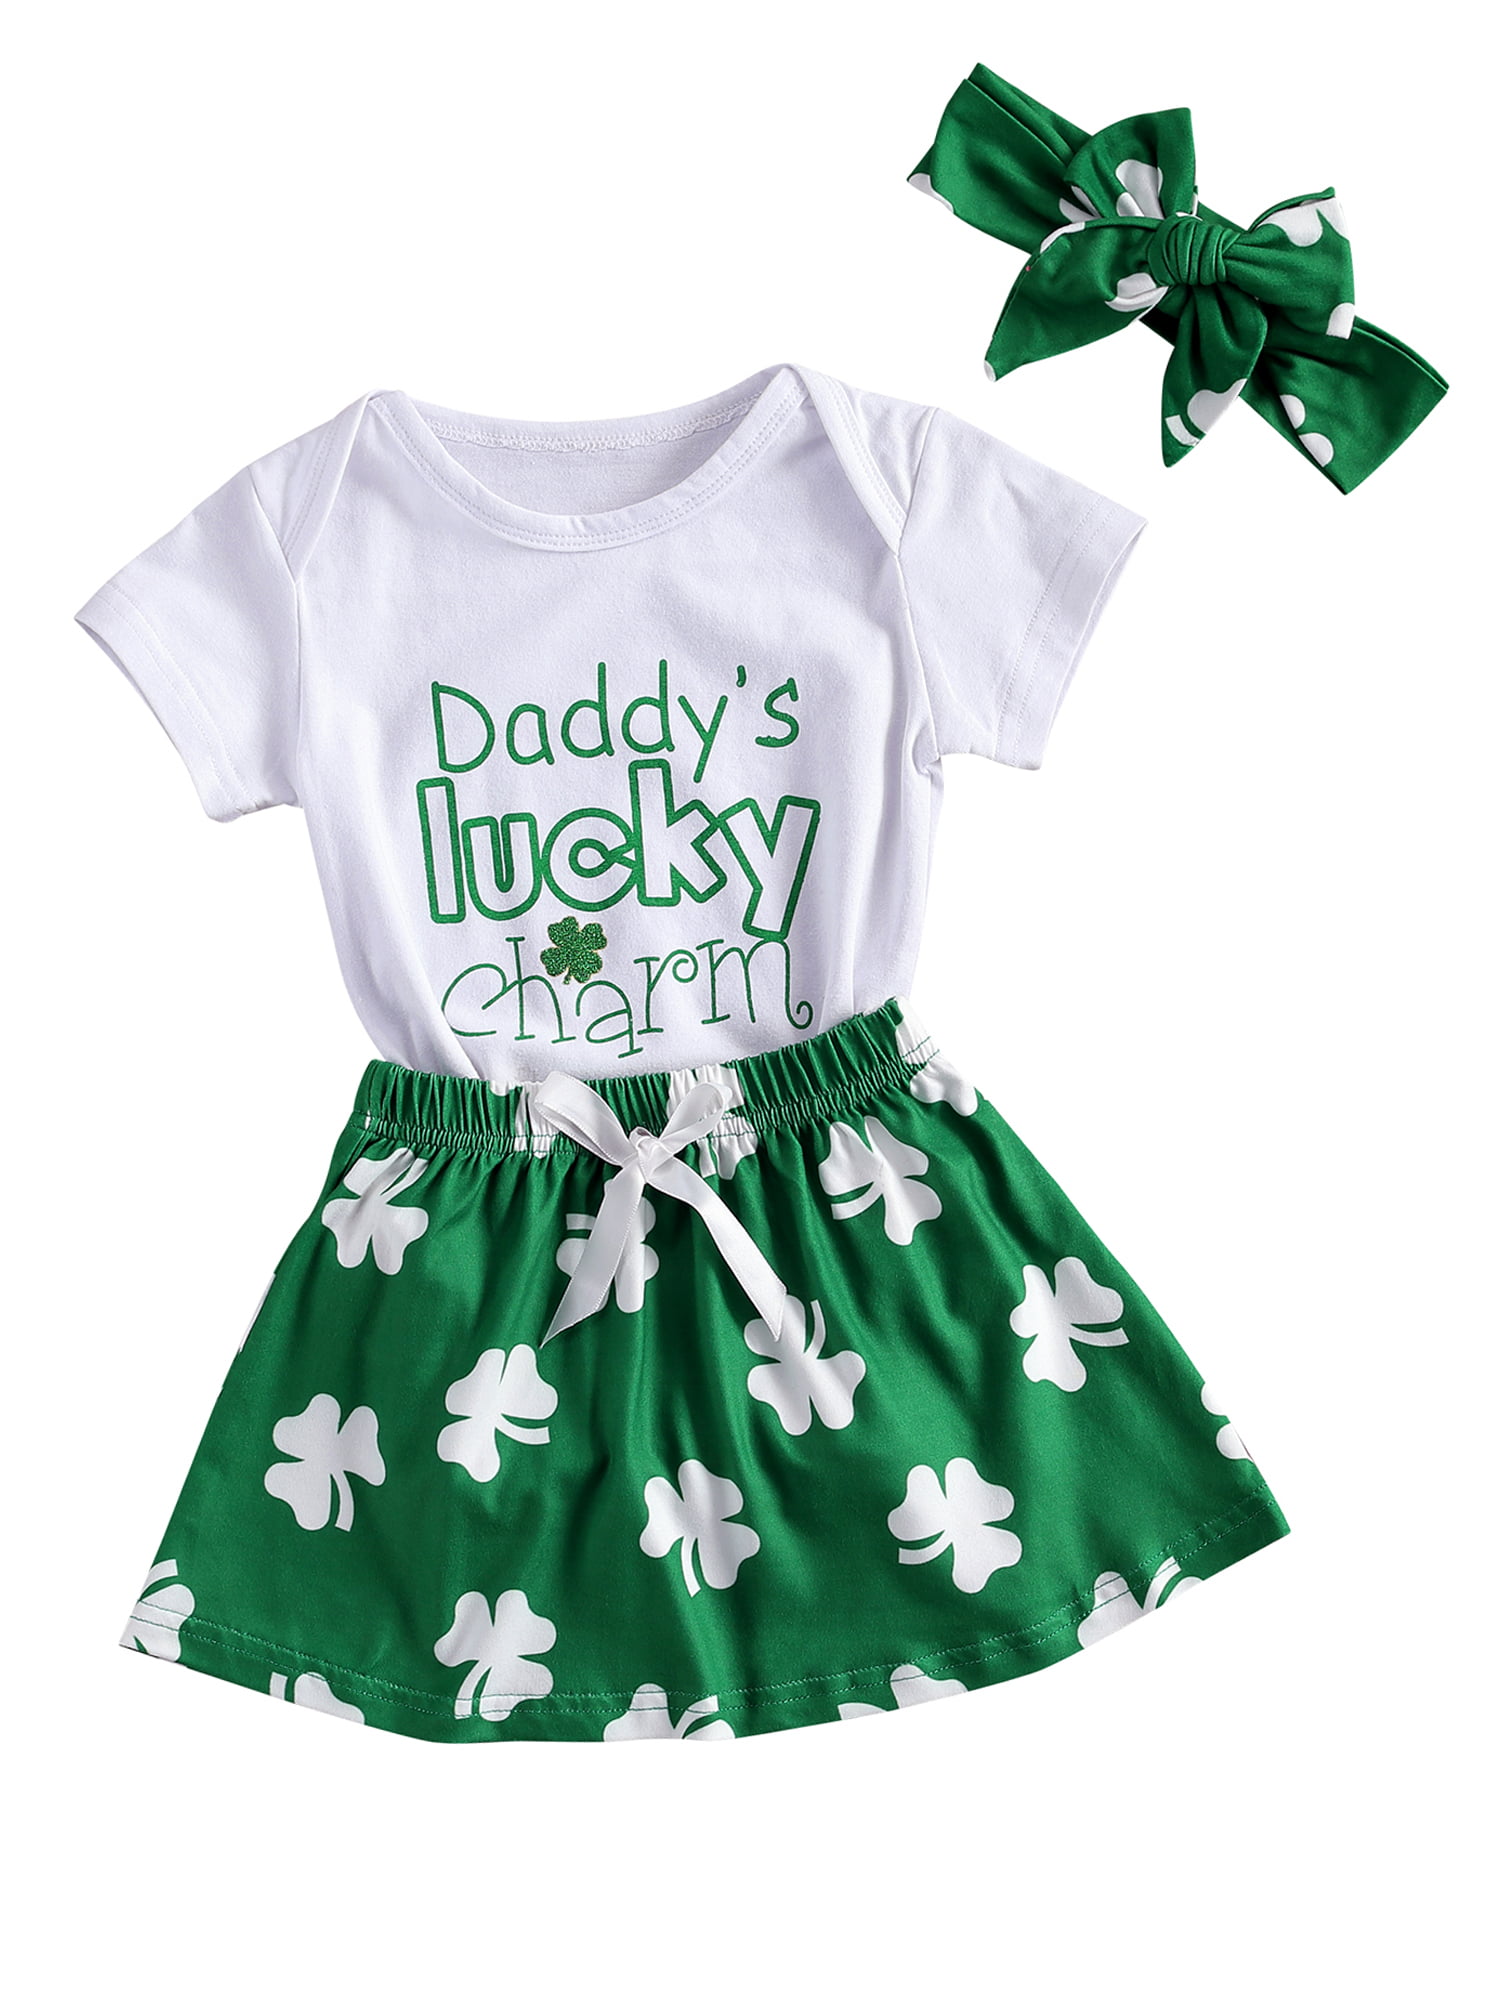 Infant Baby Girls St Patrick's Day Dress Outfits Clothes Shamrock Skirt Romper 